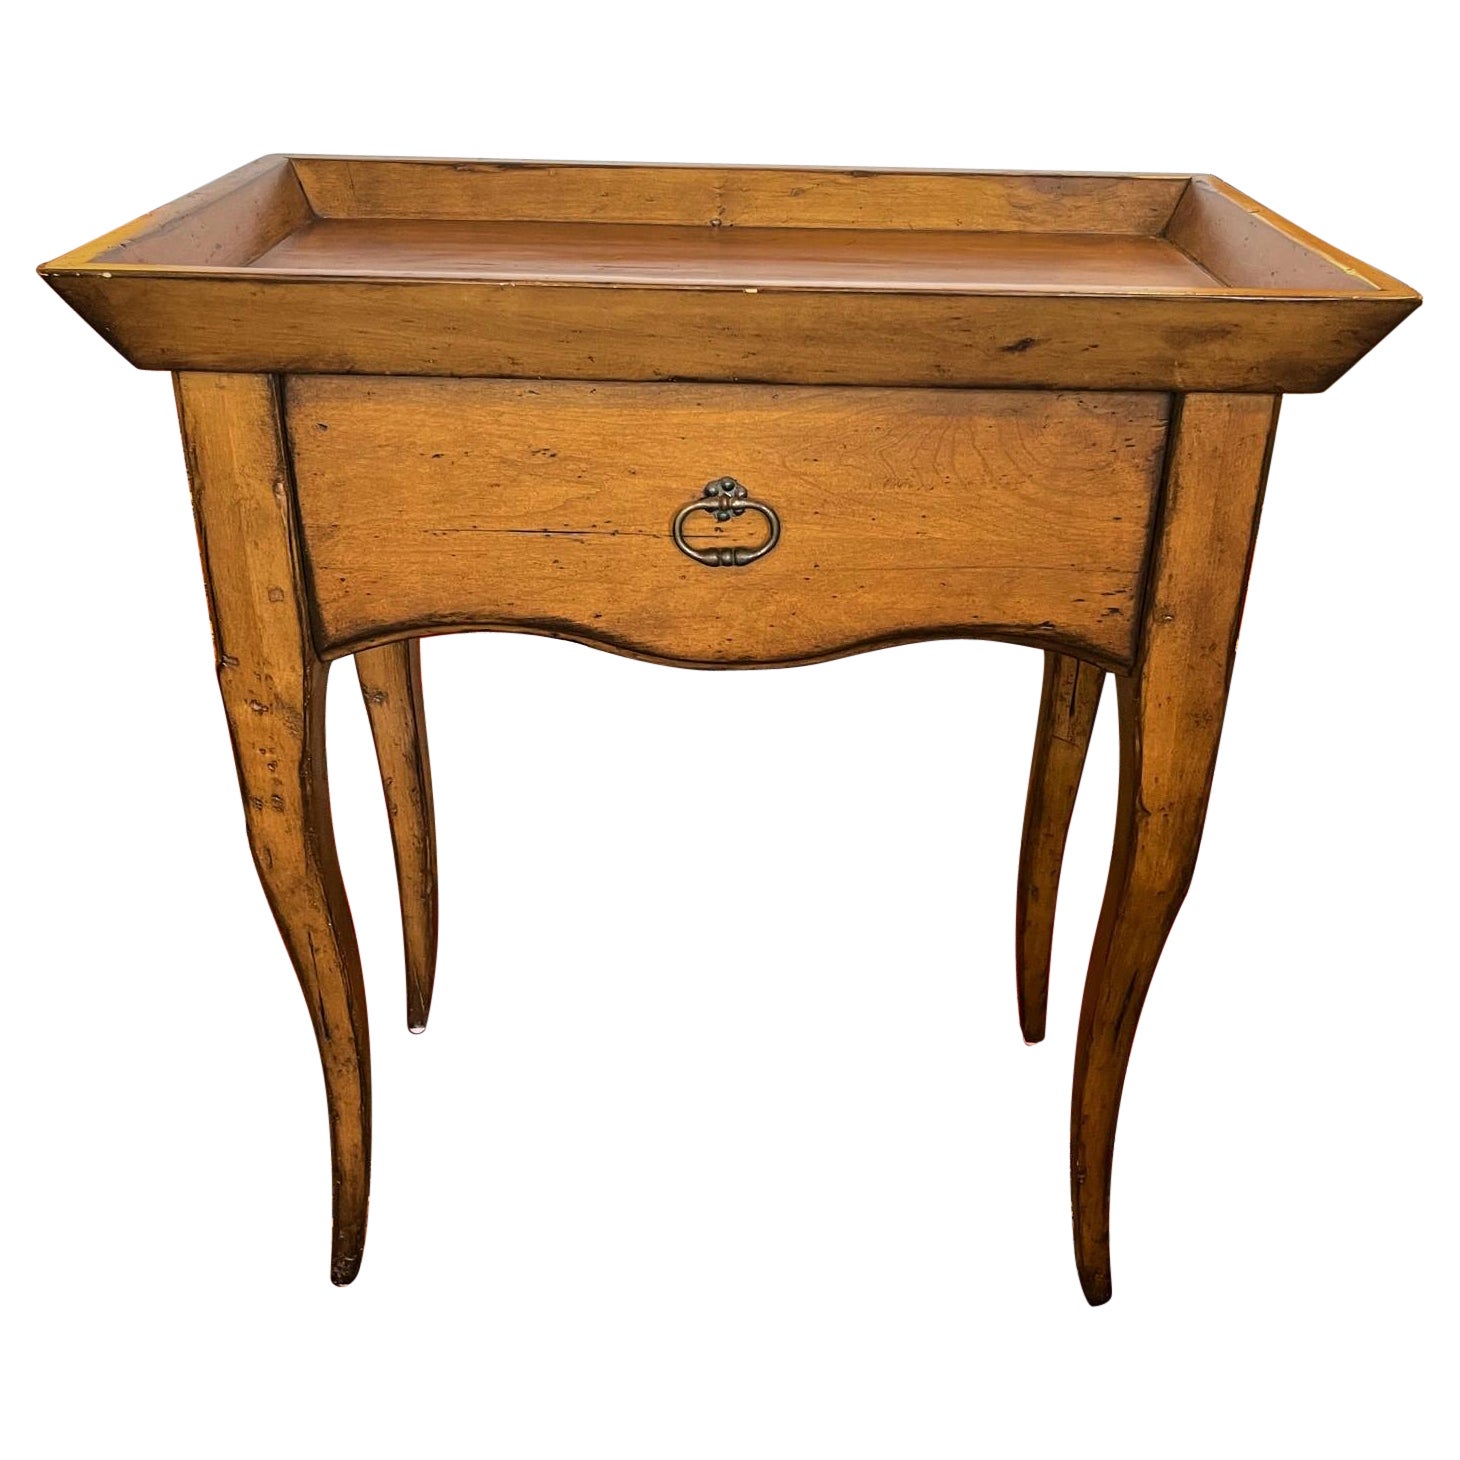 French Provincial Tray Top Side Table with a Drawer, 19th Century